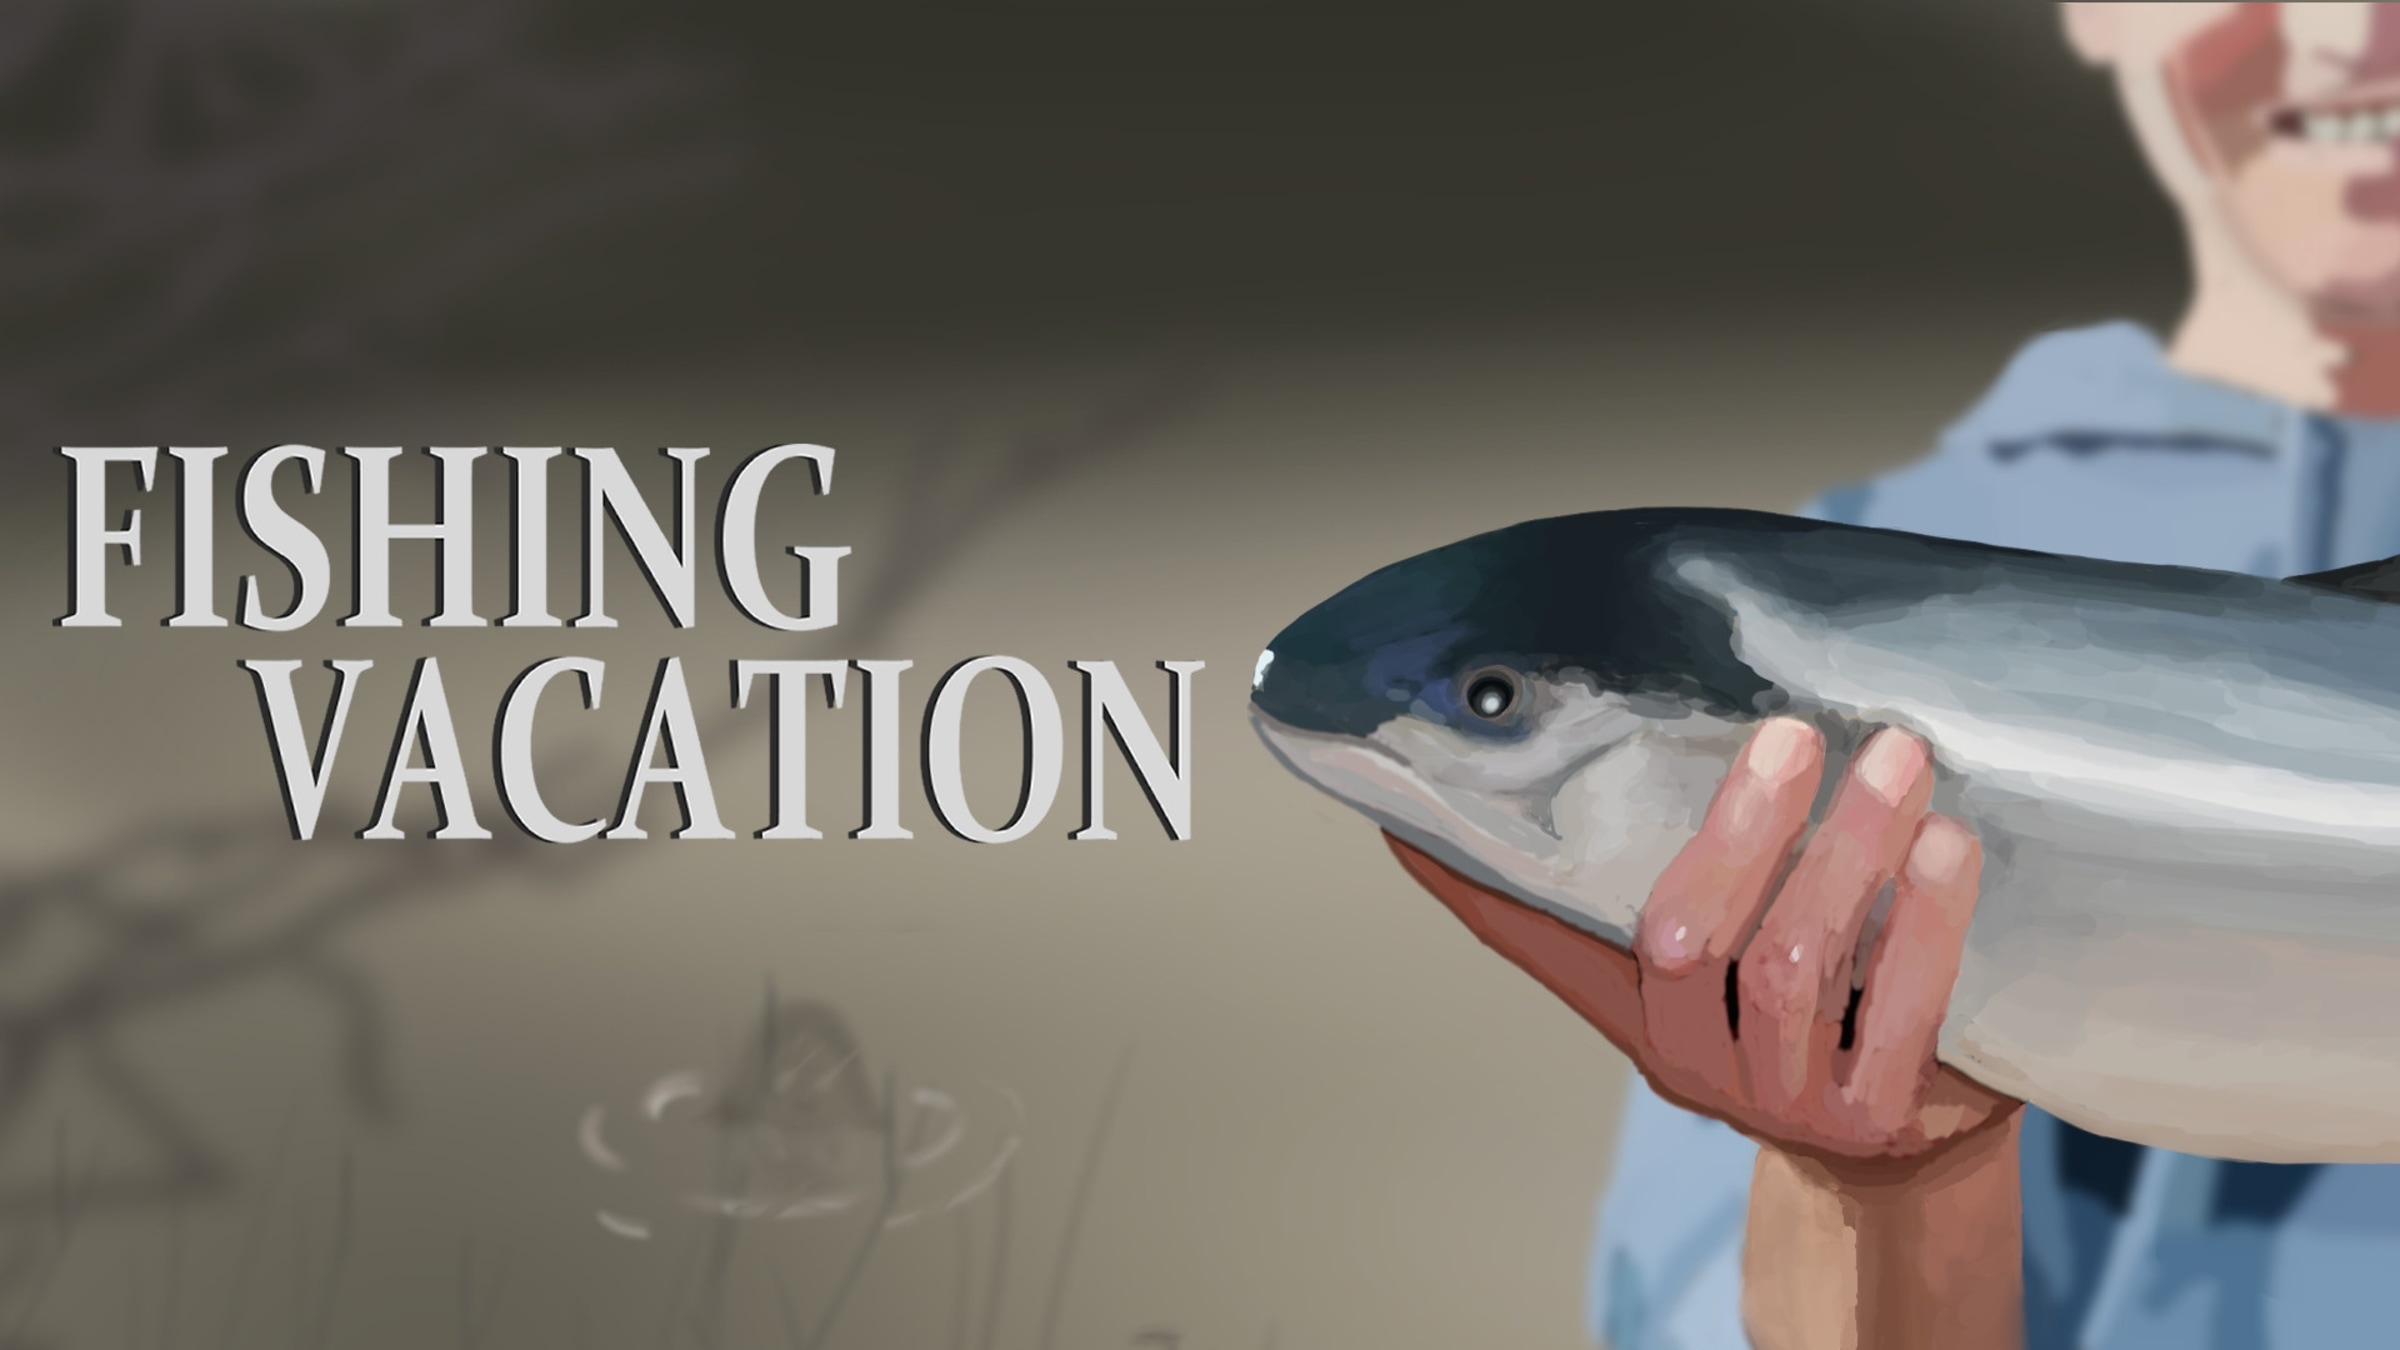 Fishing Vacation for Nintendo Switch - Nintendo Official Site